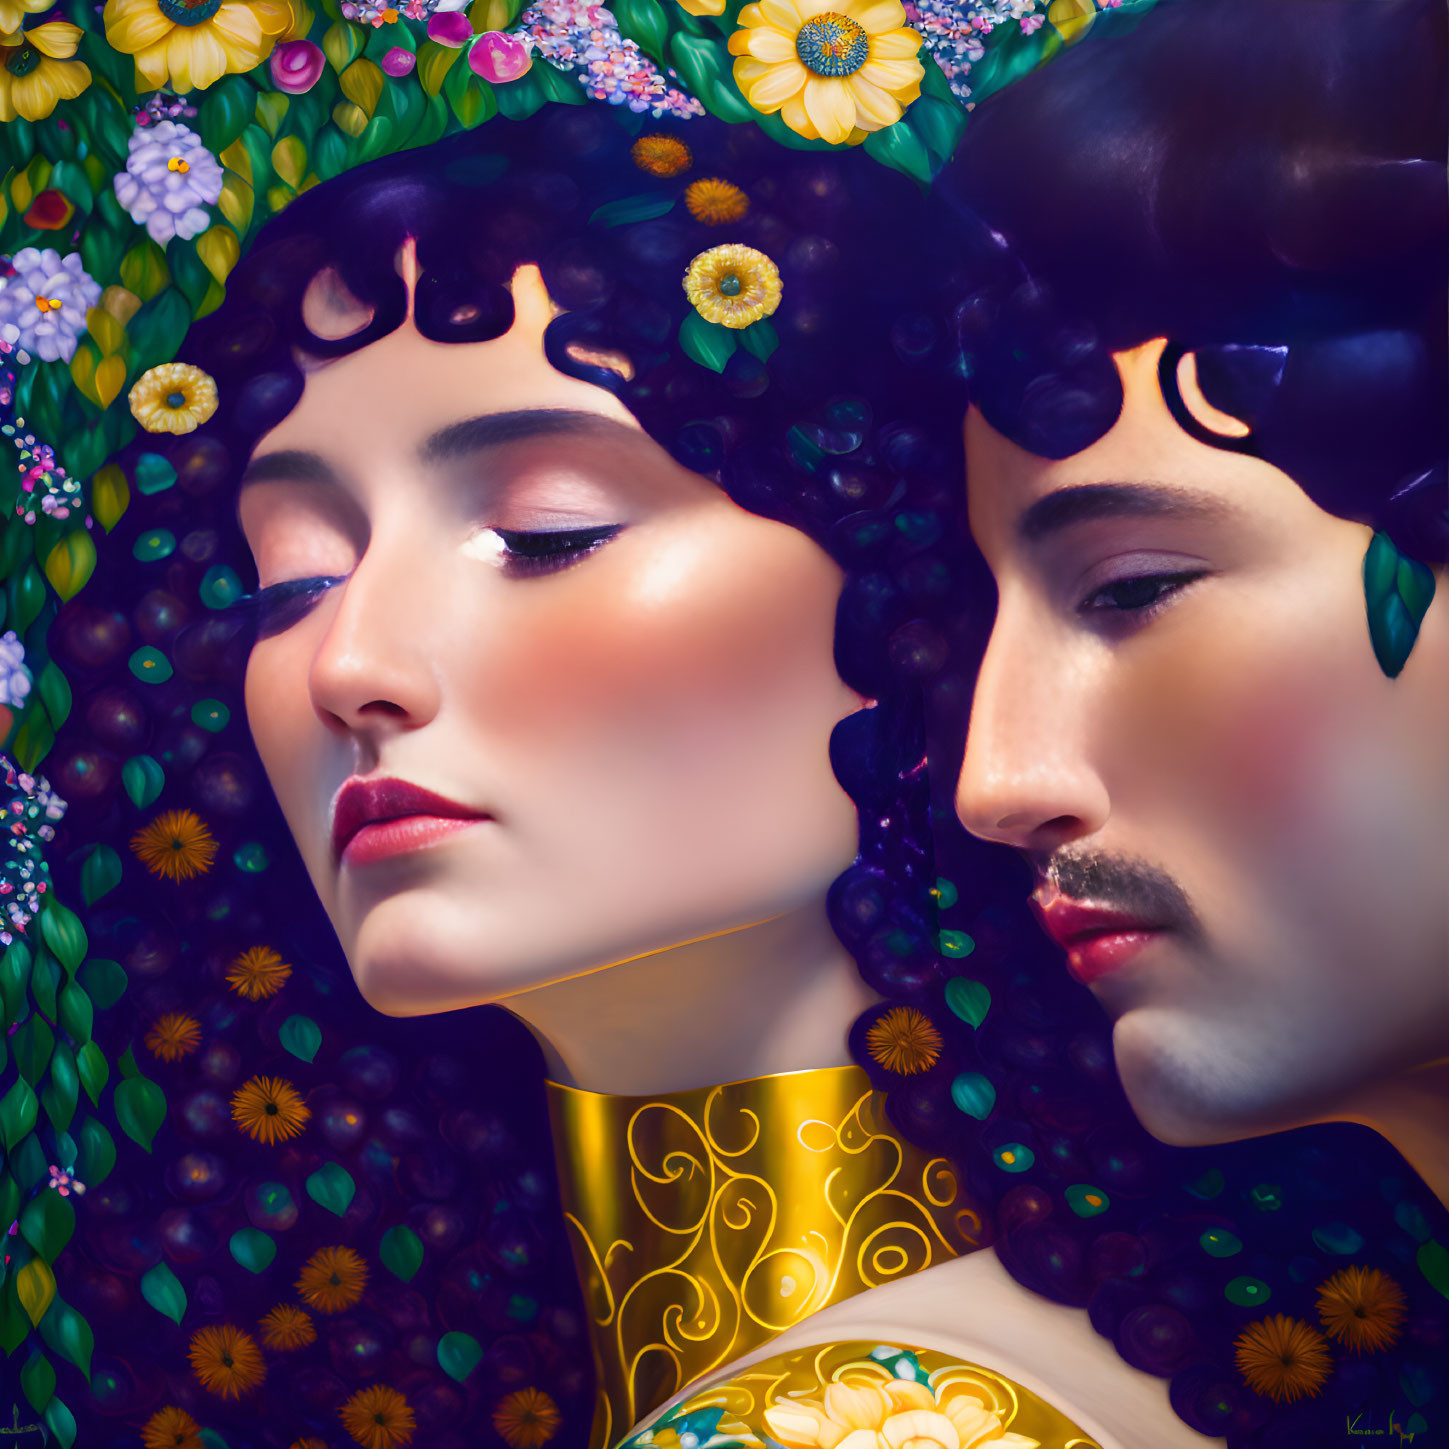 Digital painting of stylized woman and man in romantic, mythological setting